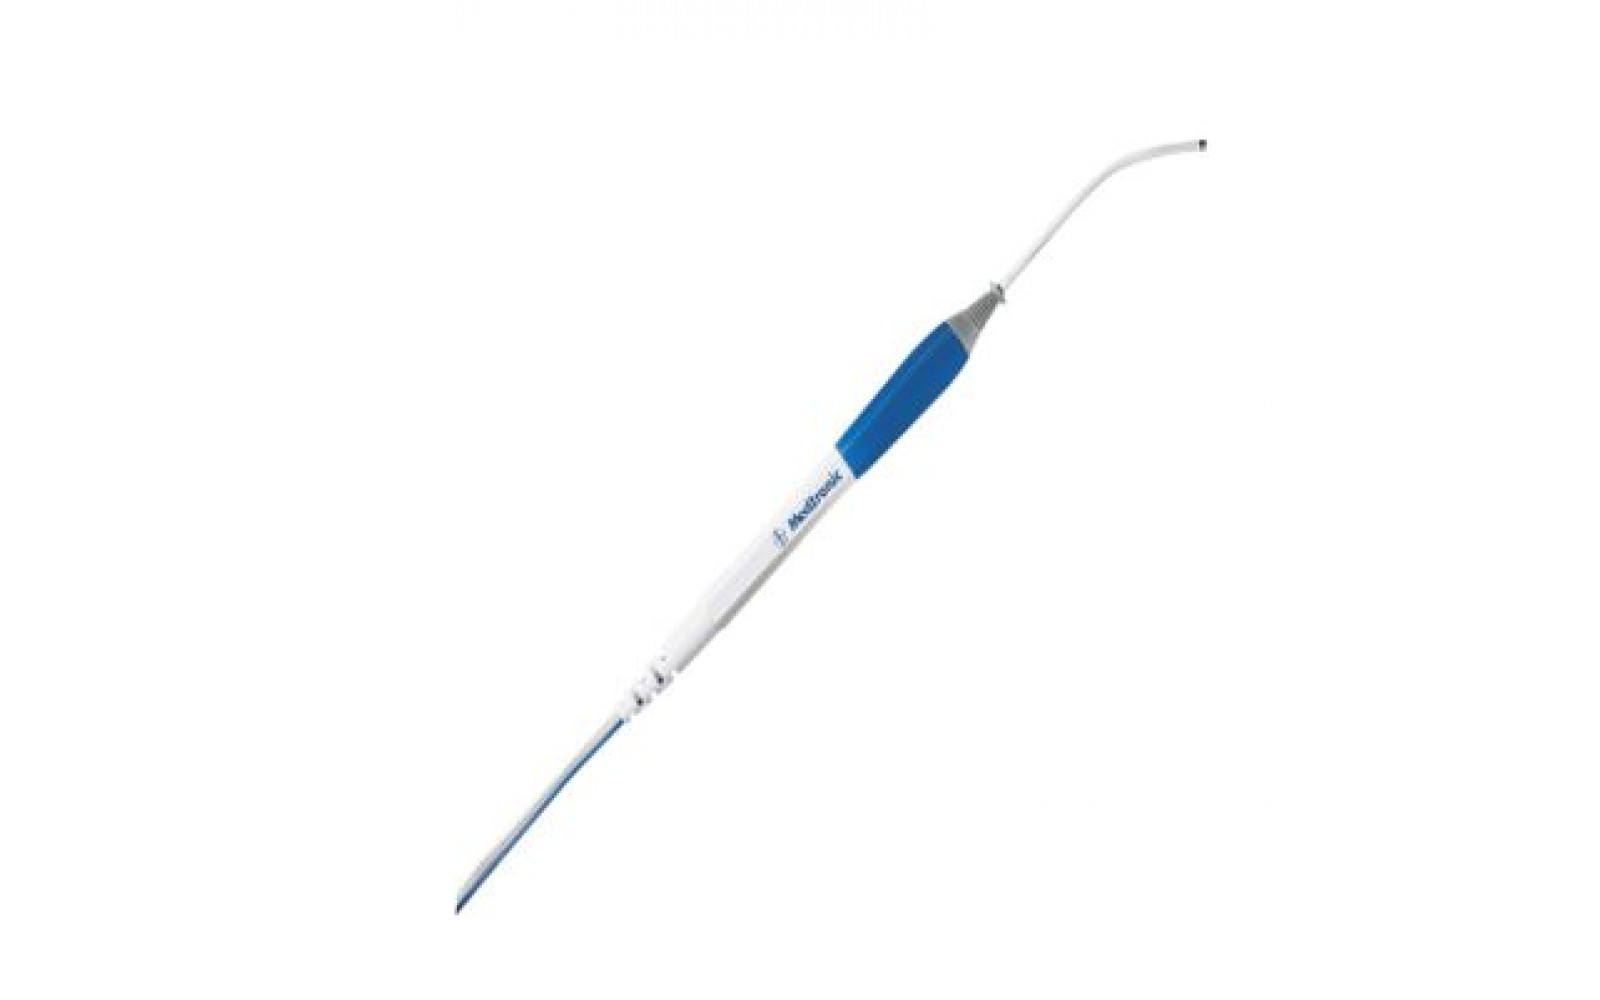  Cardioblate™ Surgical Ablation PEN (Medtronic)